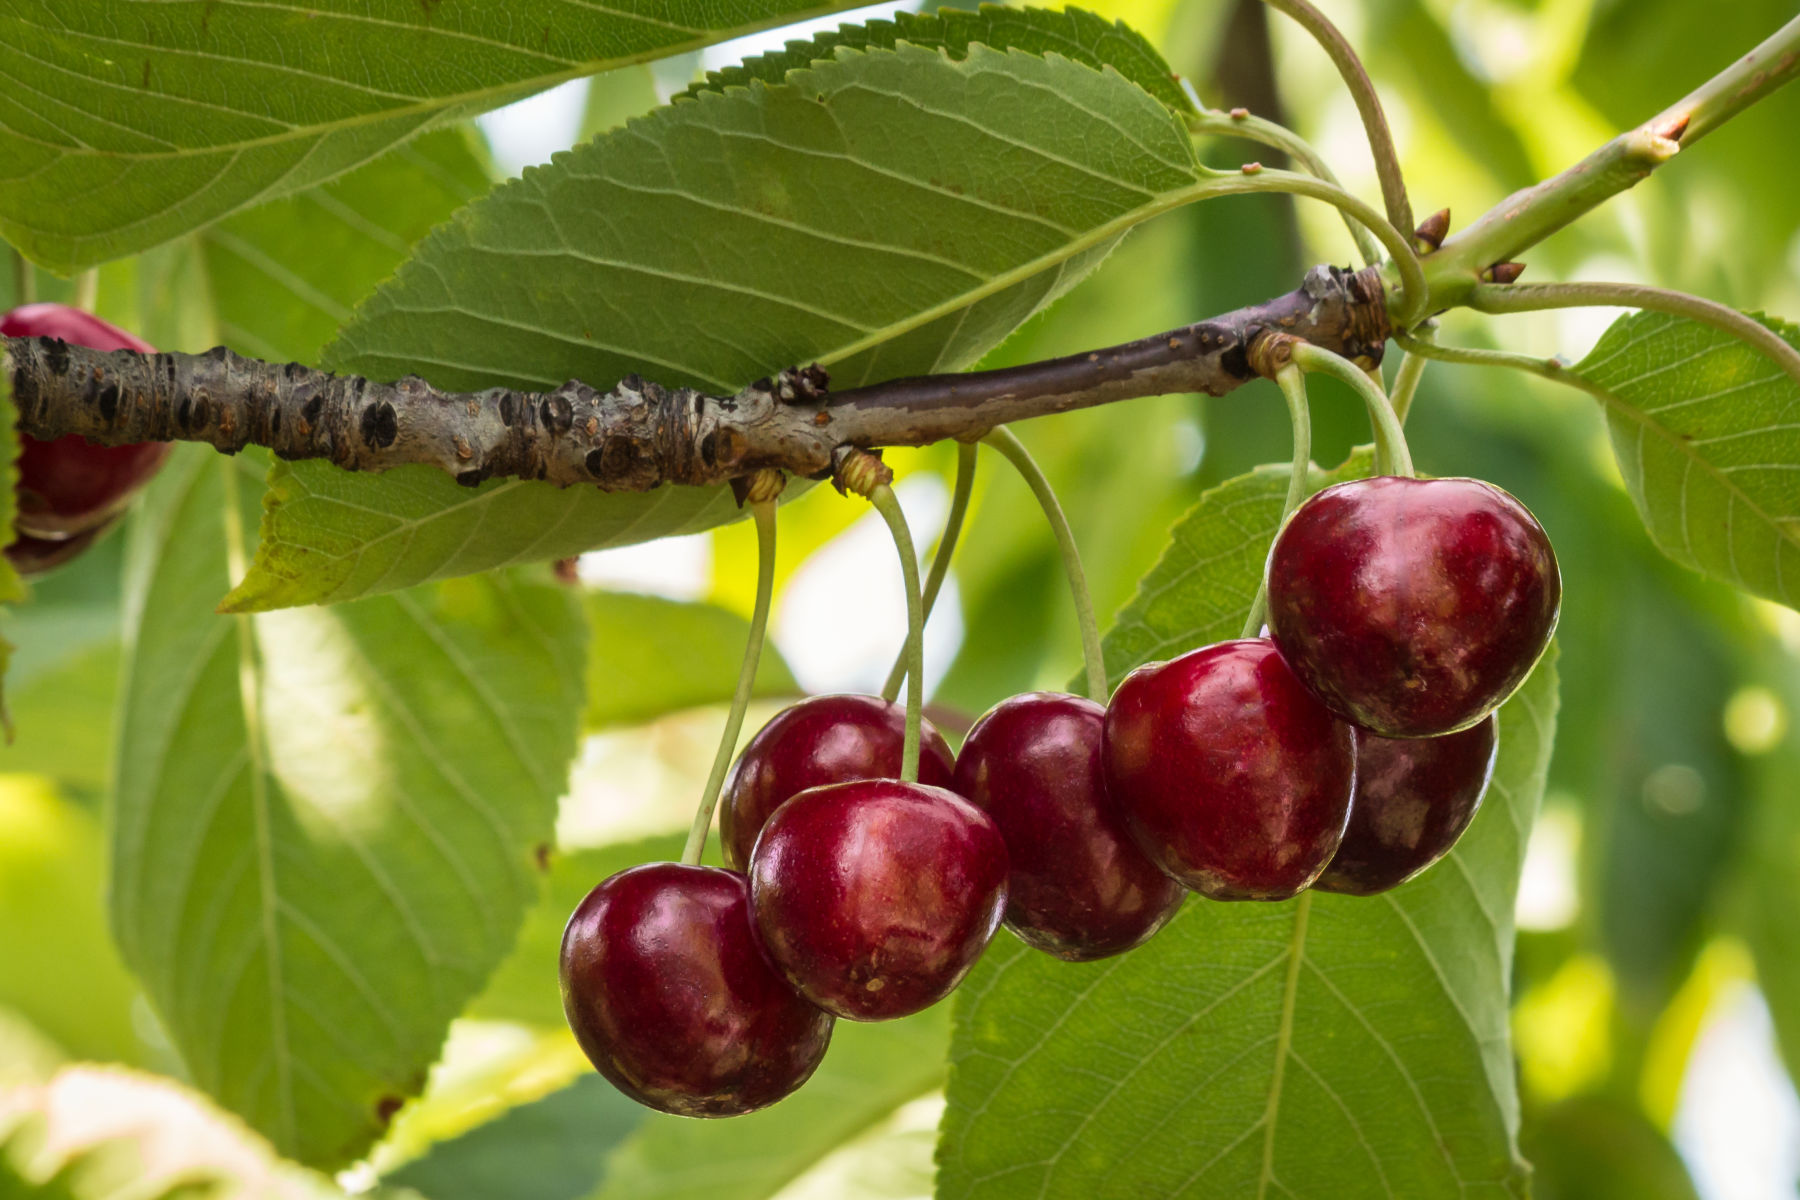 Climate change impacts on cherry